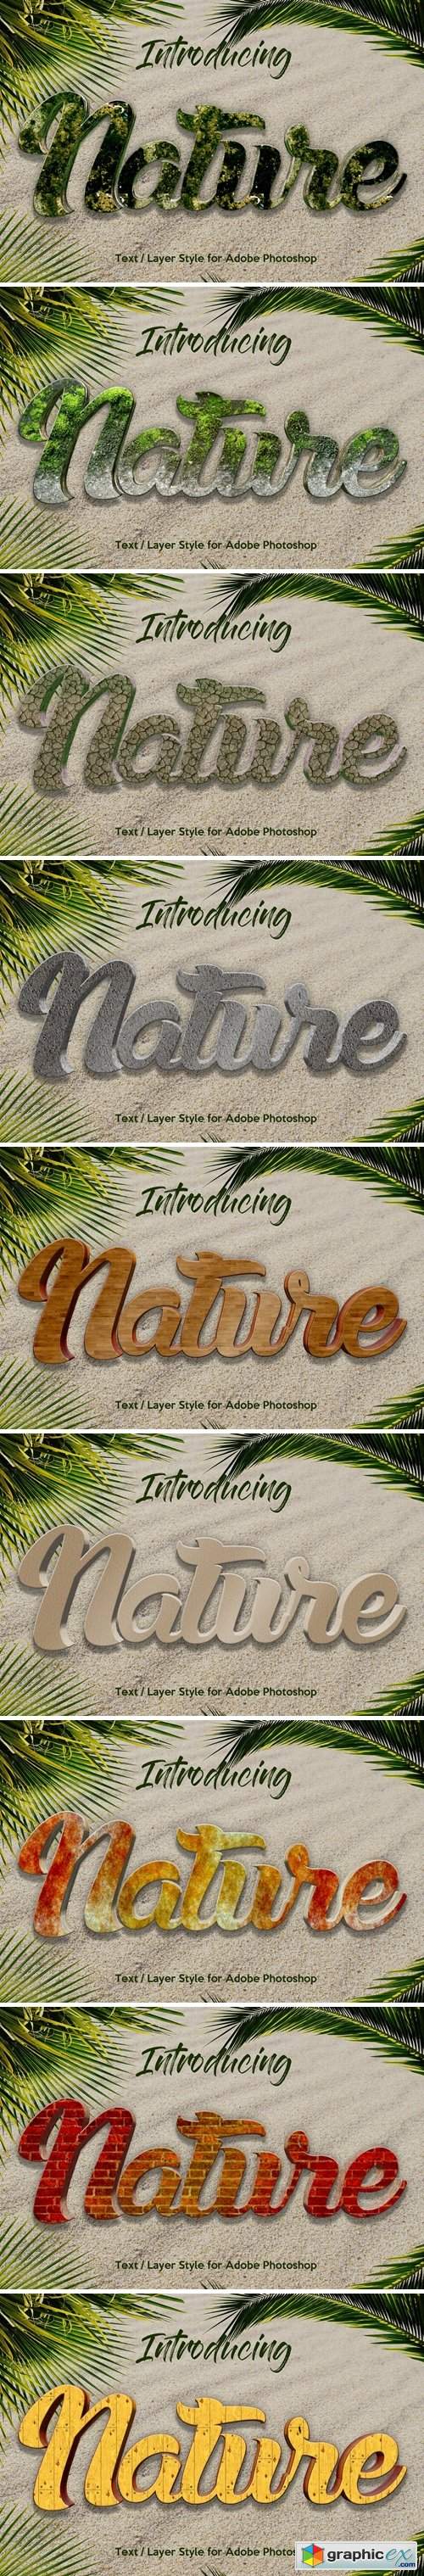 10 Nature Layer Style for Photoshop